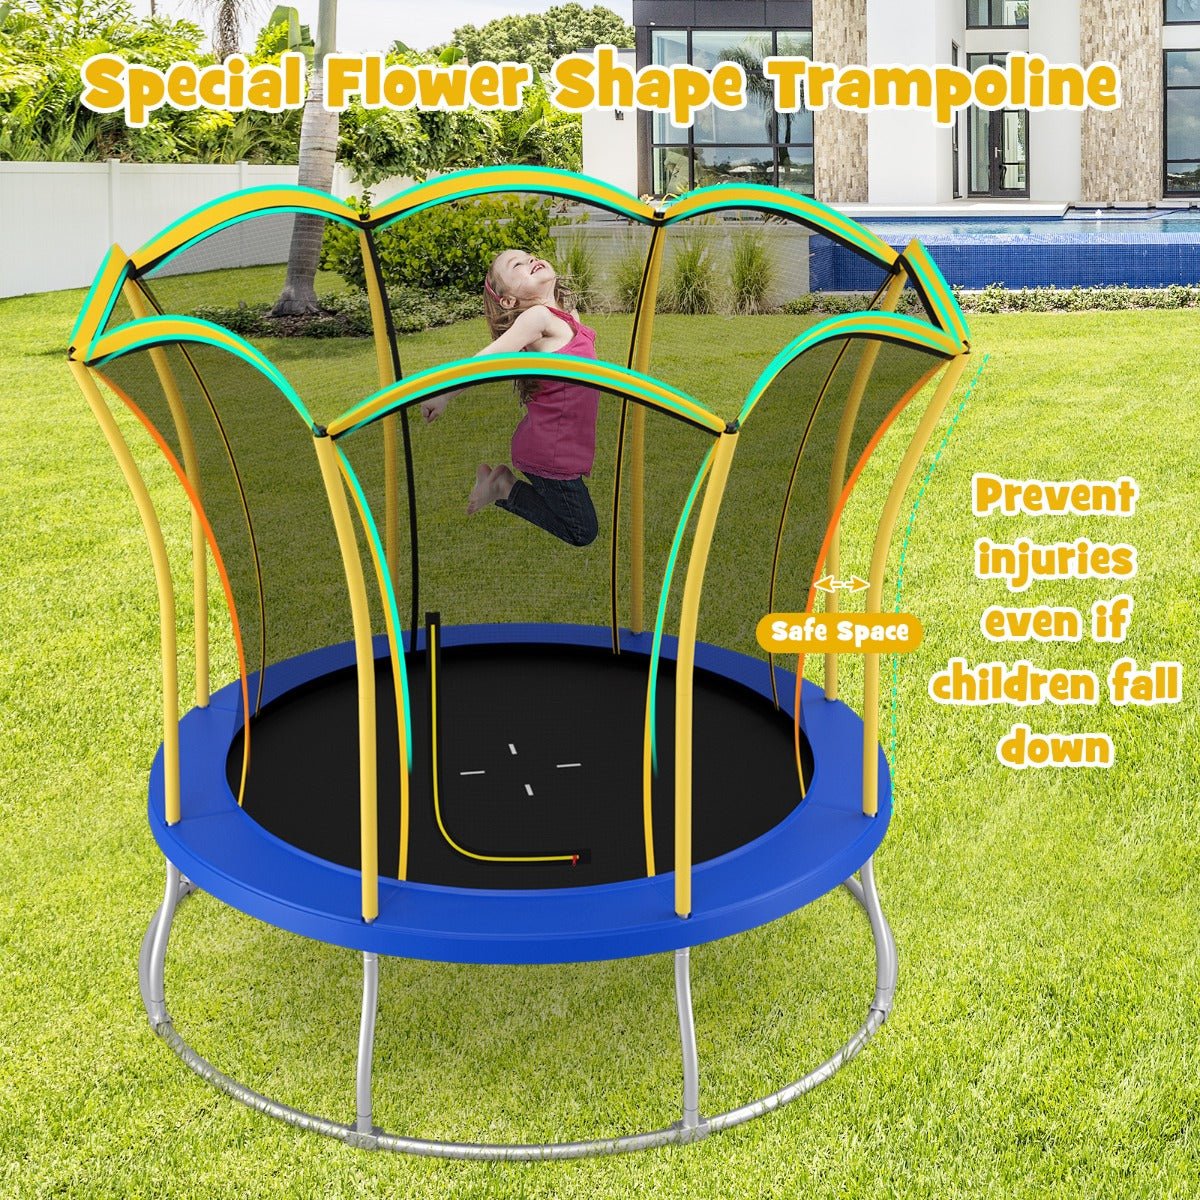 Experience Bouncing Joy with 10FT Flower Trampoline - Shop Now